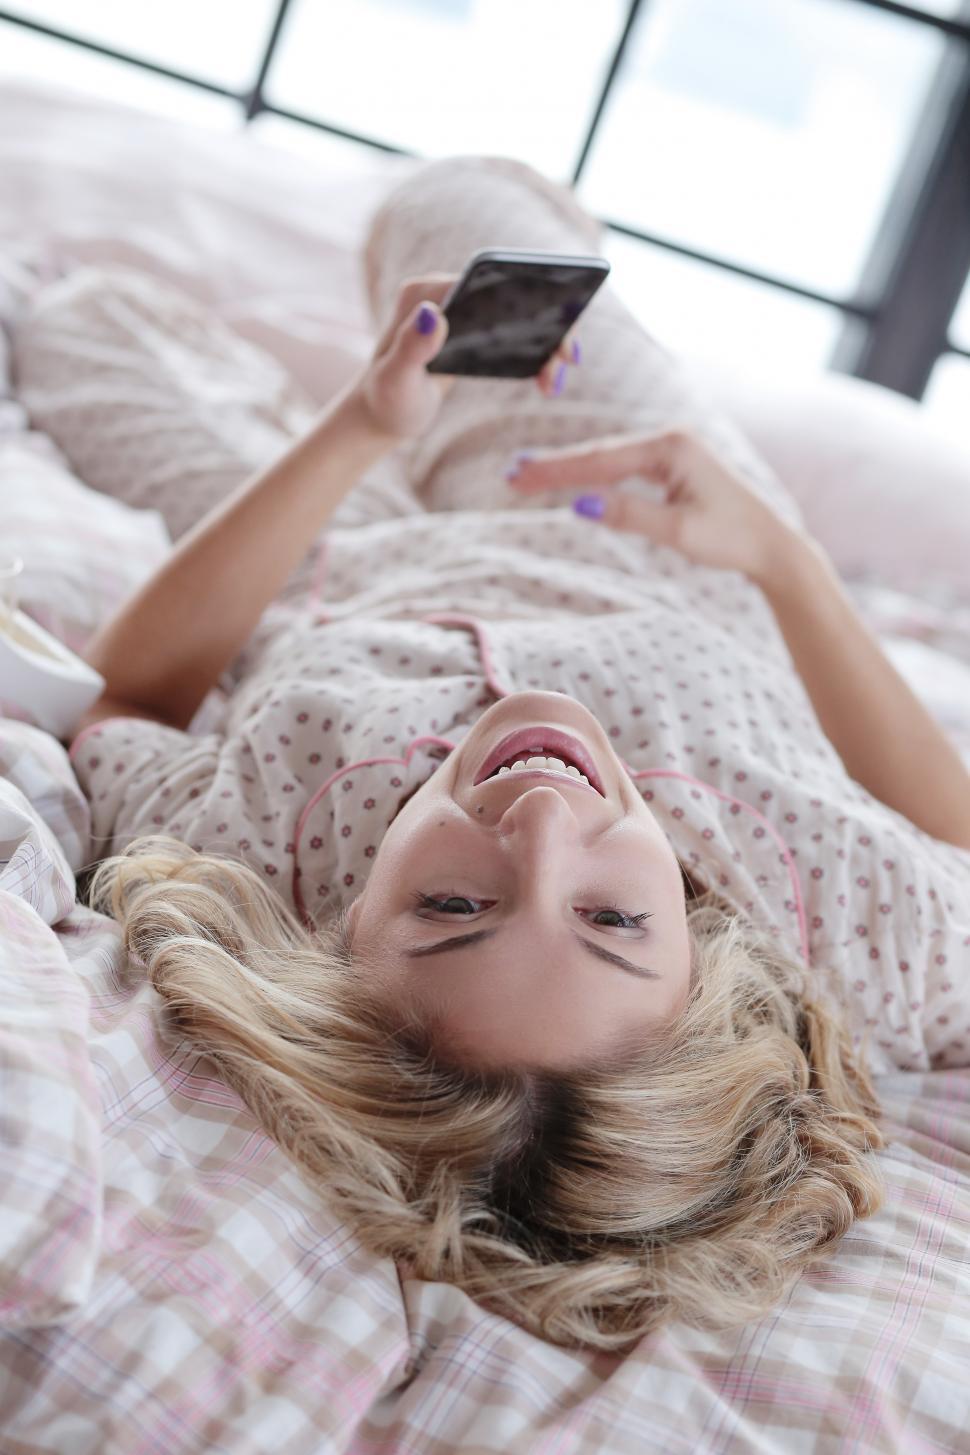 Free Image of Girl in bed, laughing at something on her phone 